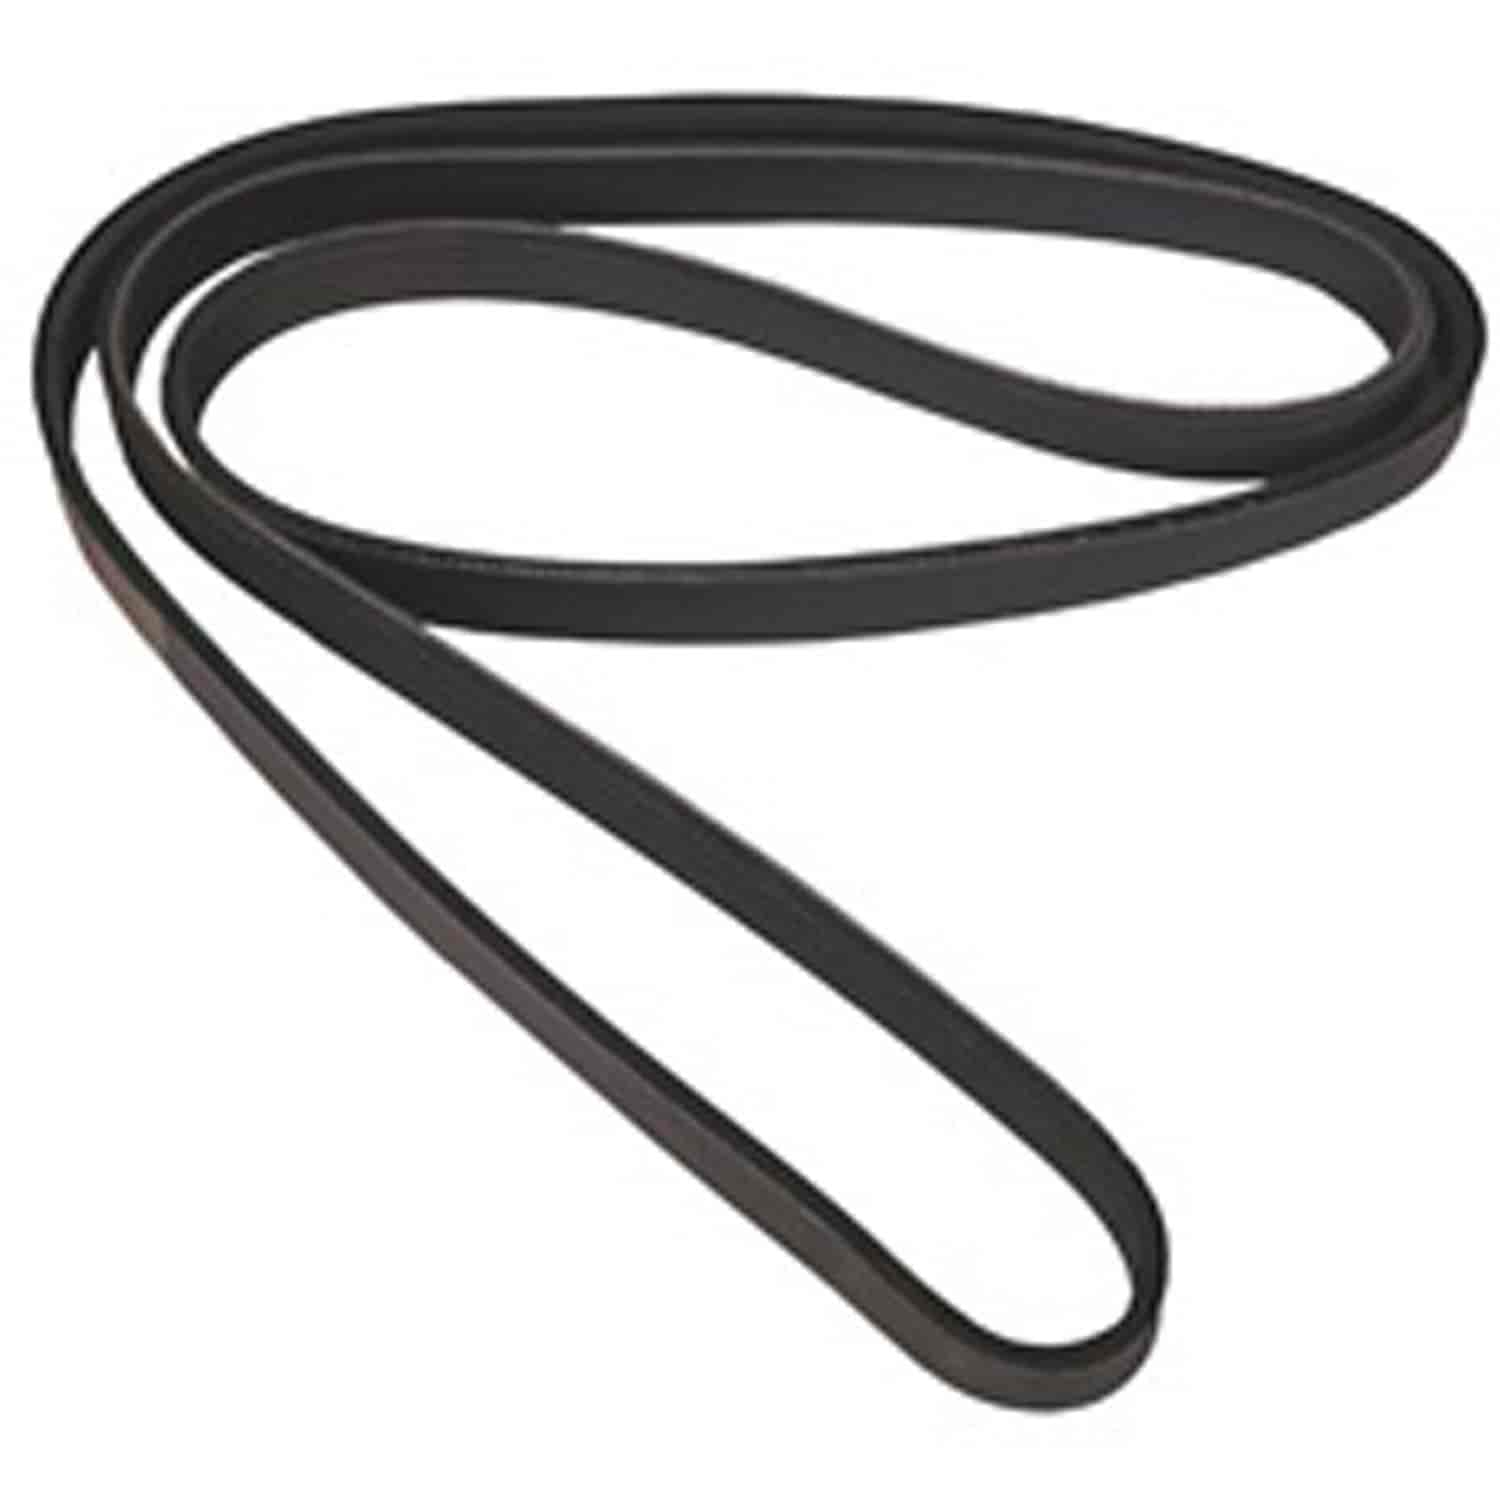 Replacement serpentine belt from Omix-ADA, Fits 99-01 Jeep Grand Cherokee WJ with 4.0 liter engine and air conditioning.